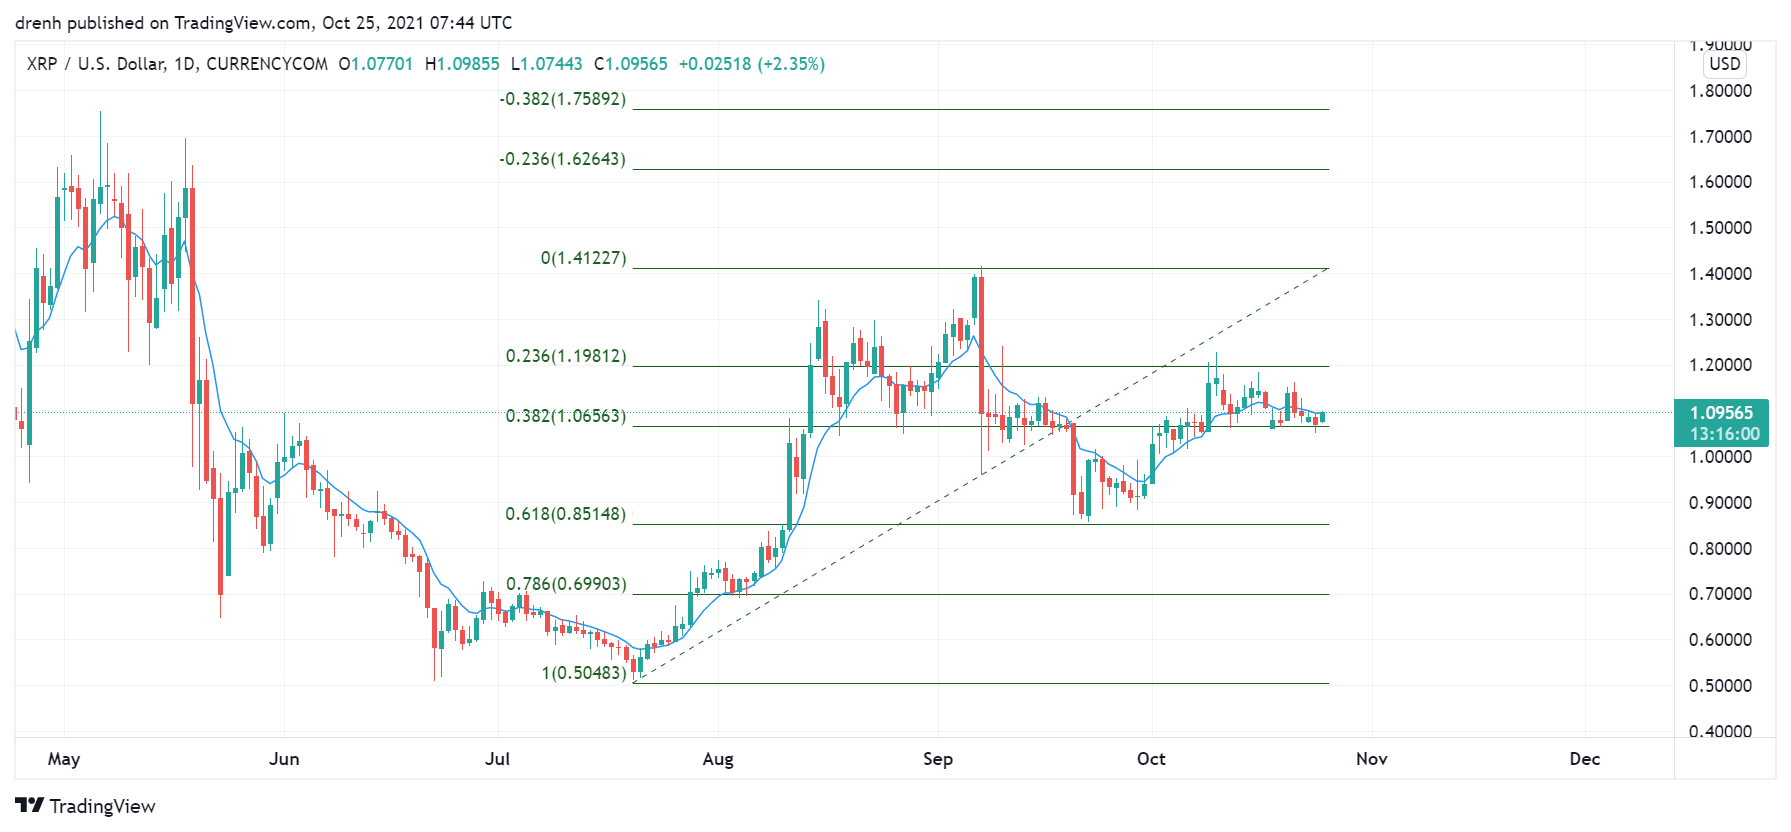 Fibonacci retracement level in for XRP in a 1-day chart